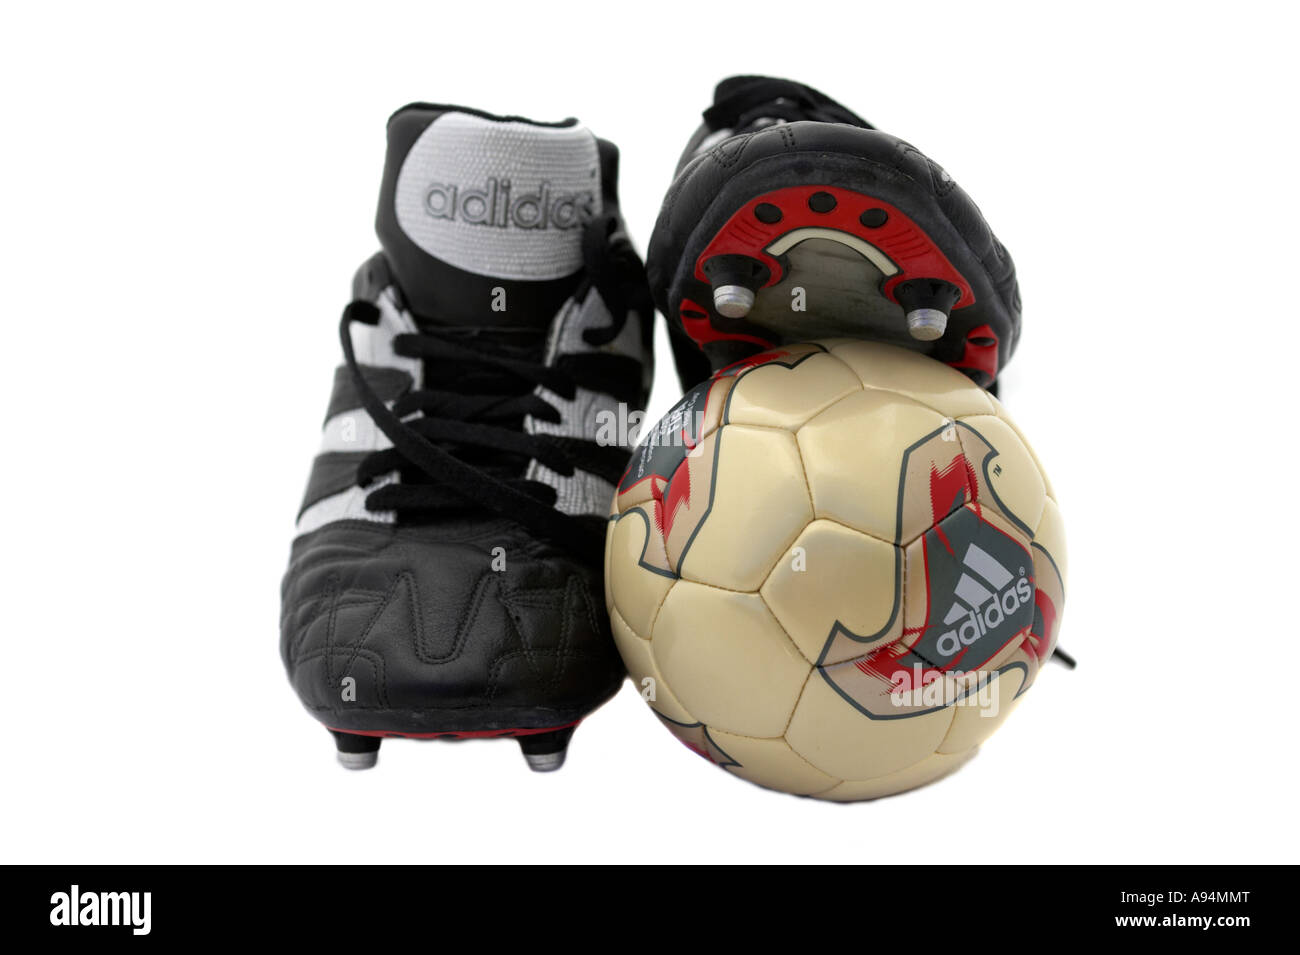 pair of black adidas football boots and mini training football against a white background Stock Photo